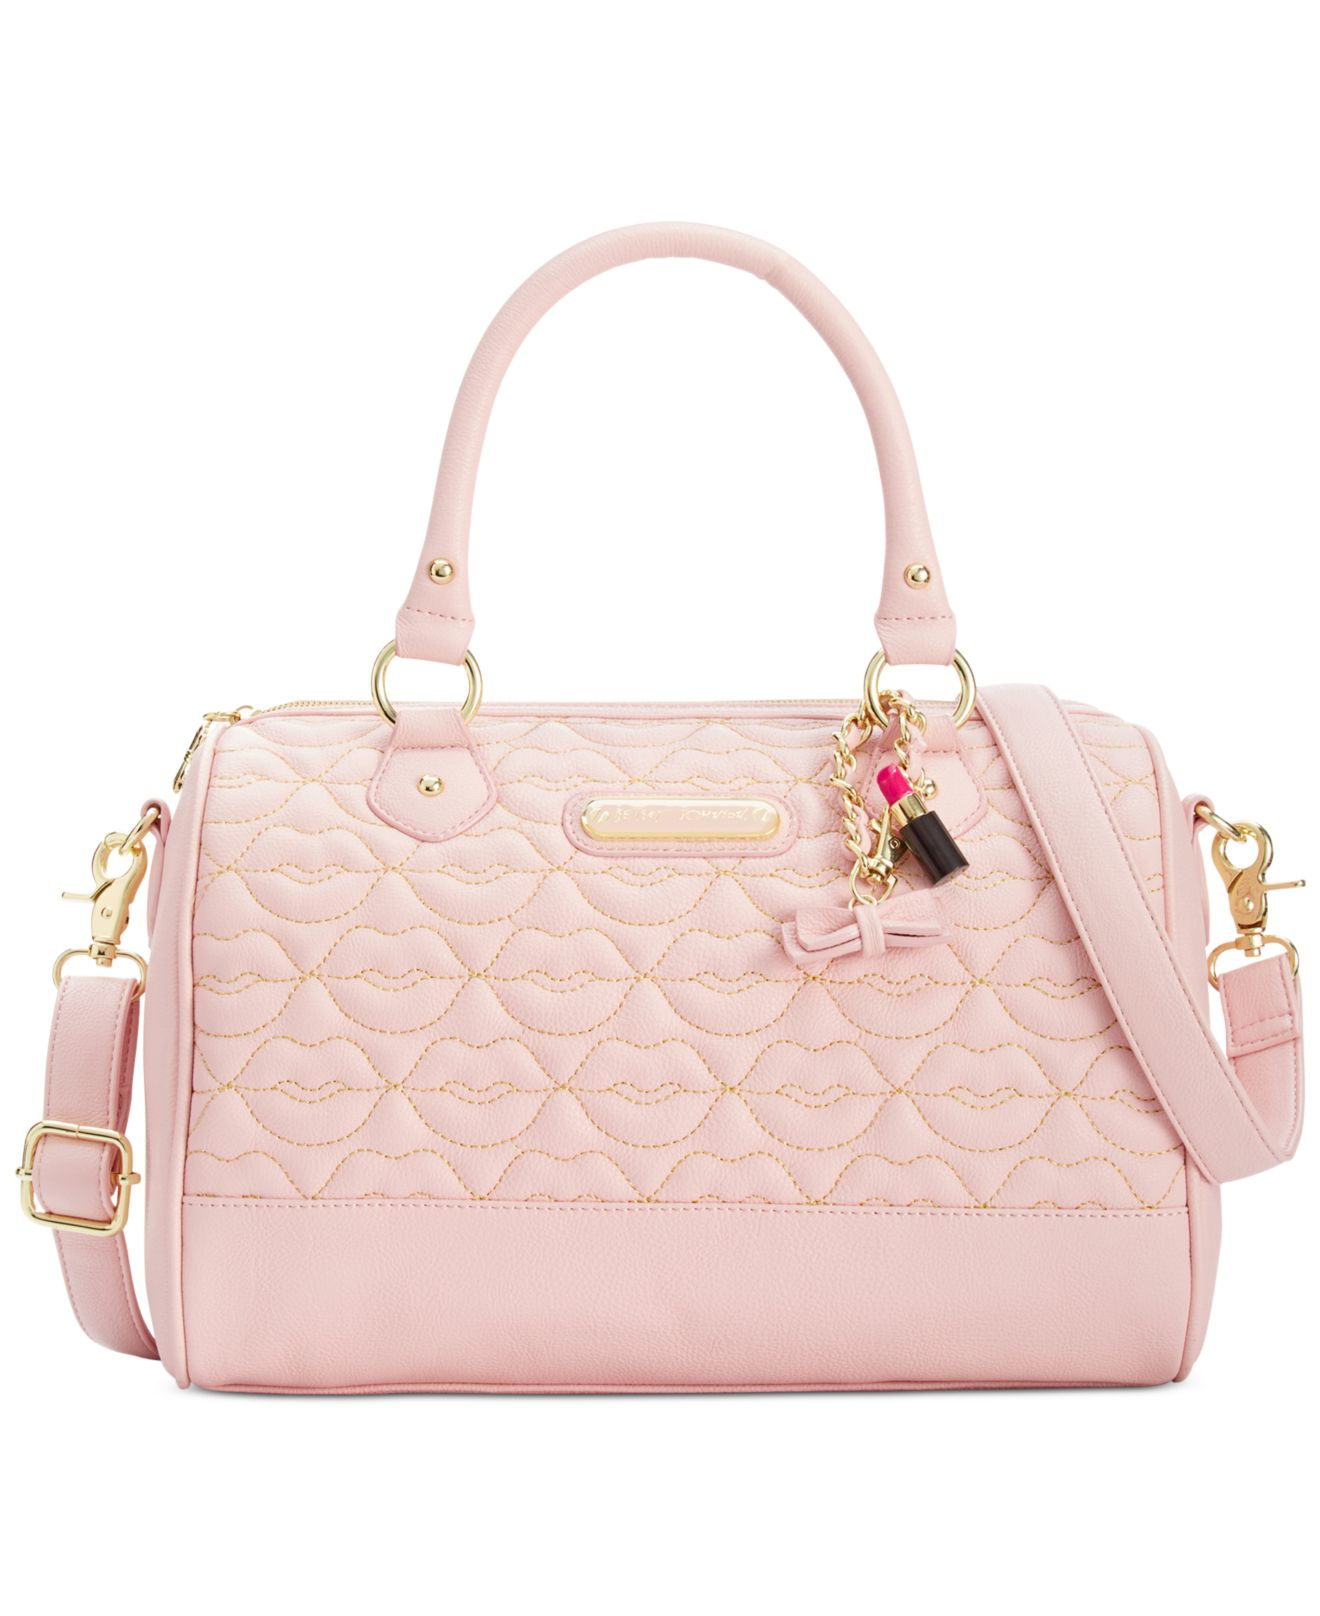 Lyst - Betsey Johnson Blush Quilted Lips Satchel in Pink